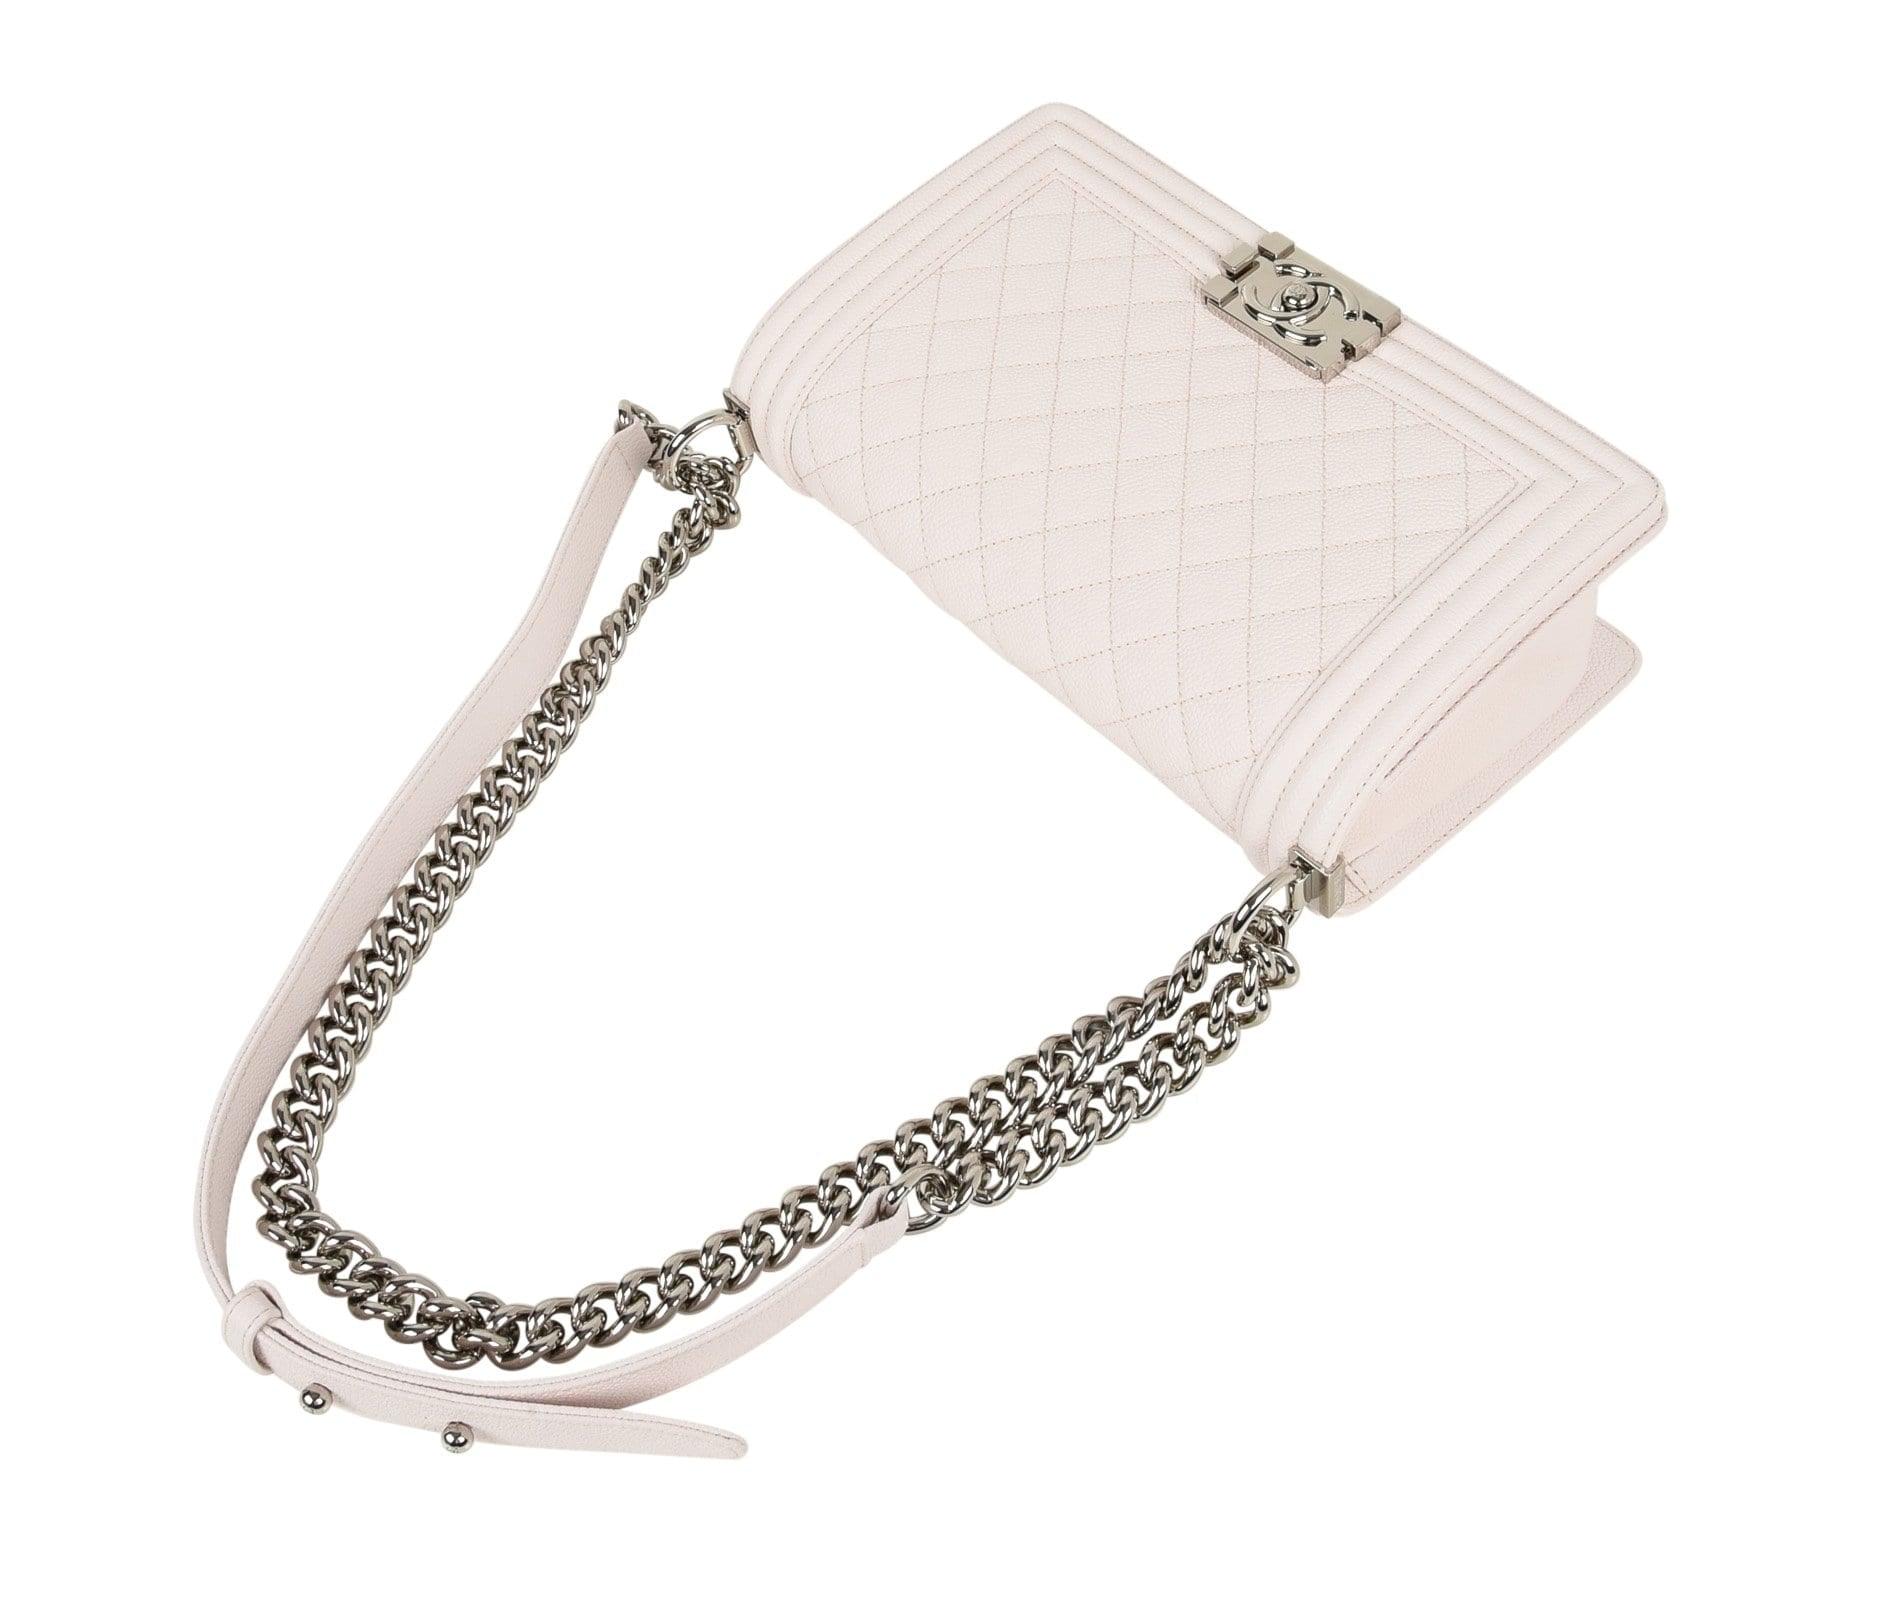 Chanel Bag Pale Pink / Nude Quilted Caviar Medium - mightychic